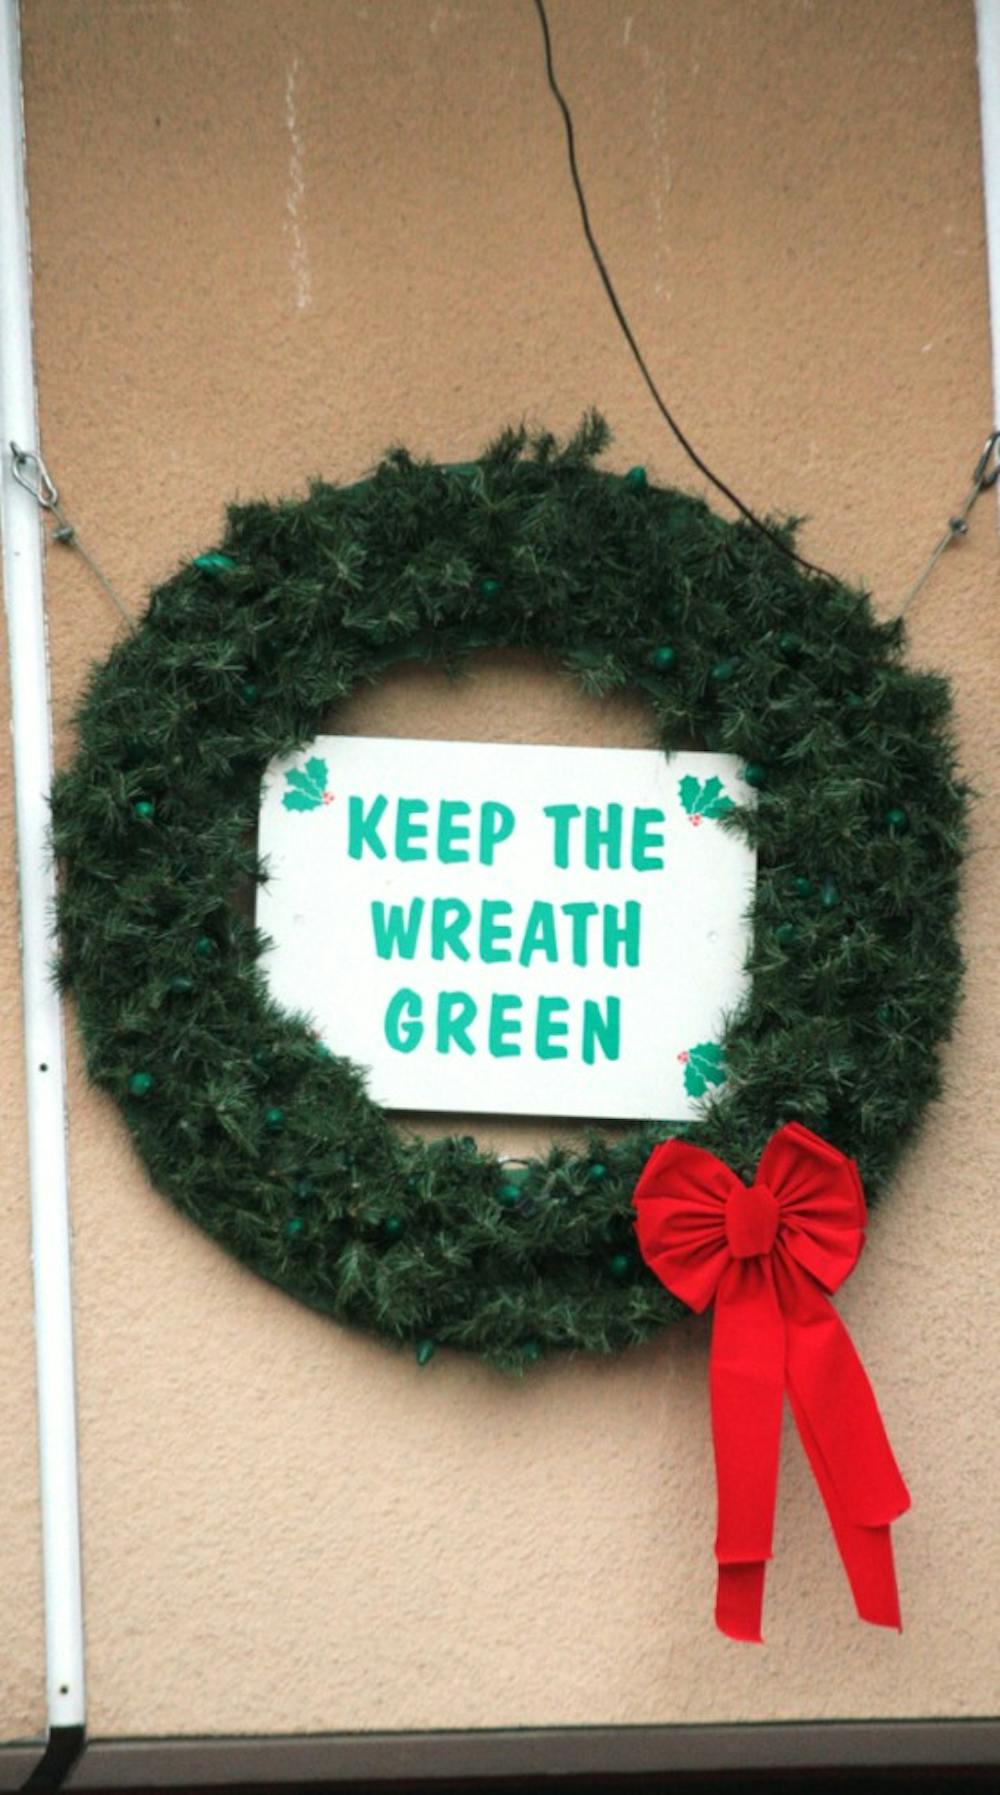 The wreath which hangs above Fire Station Number 1 serves as both a festive display and a fire safety reminder, as one of the wreath’s lights turns from green to red for every residential fire in Chapel Hill.